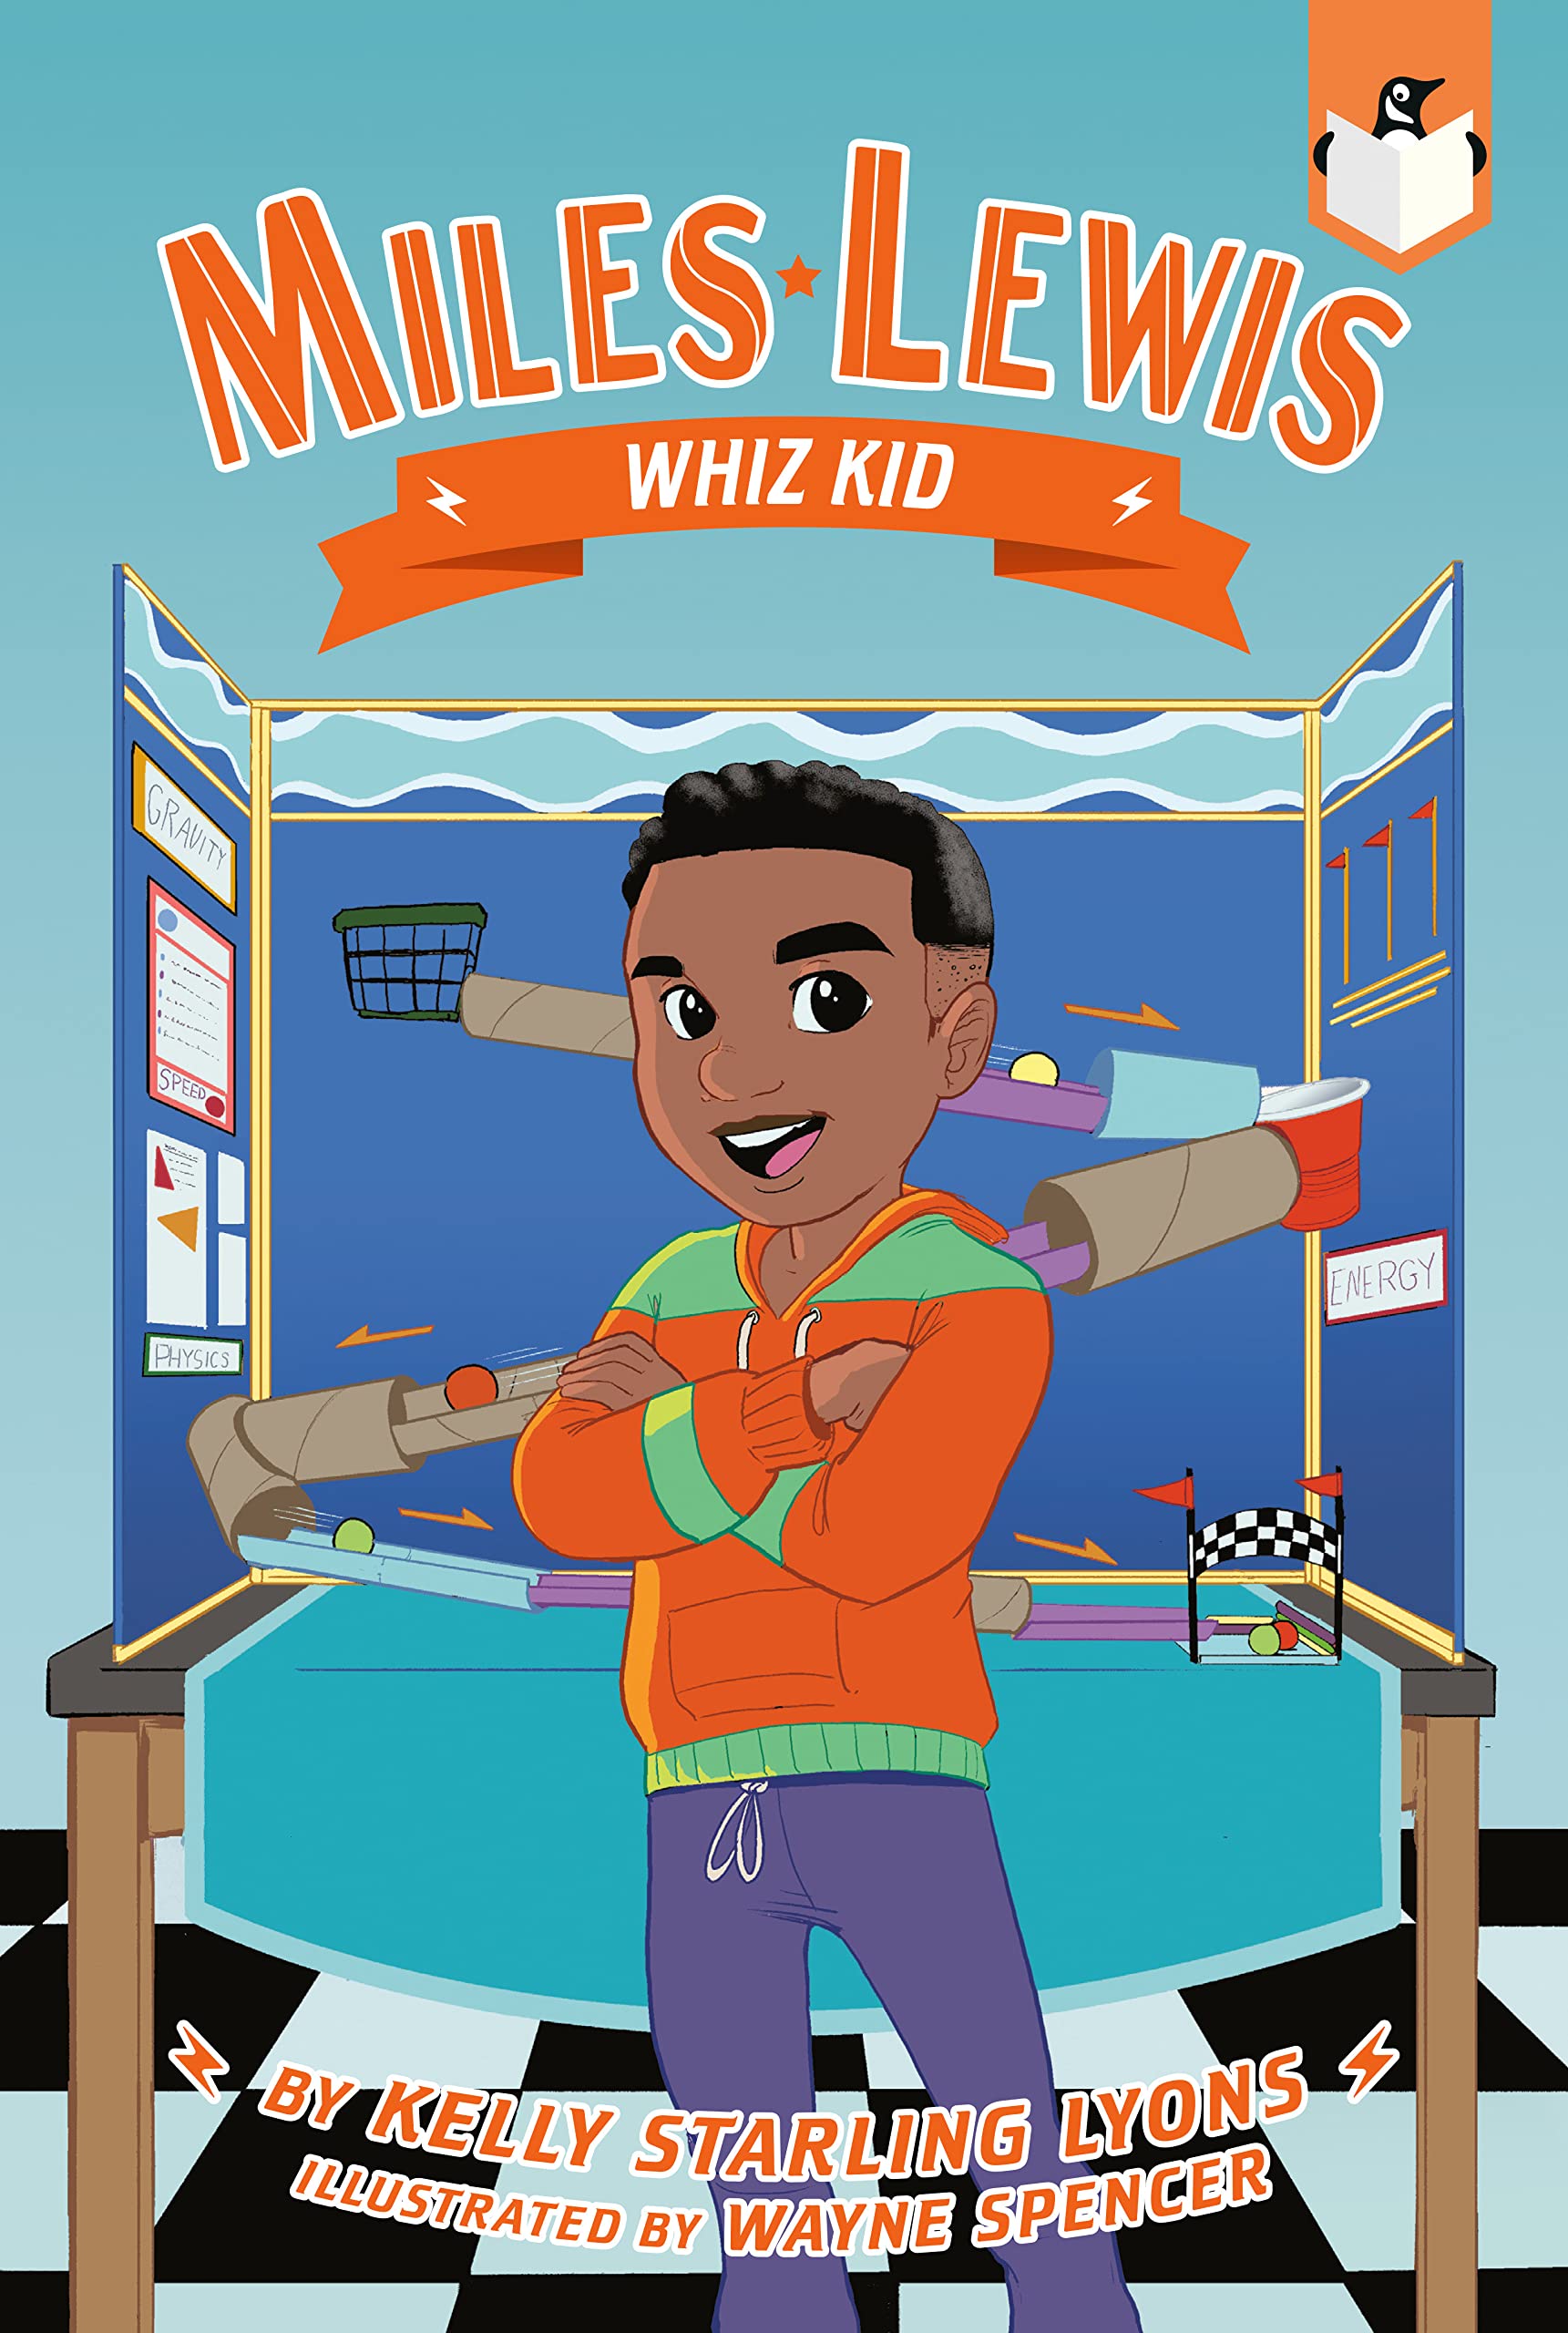 Book Cover Miles Lewis: Wiz Kid by Kelly Starling Lyons